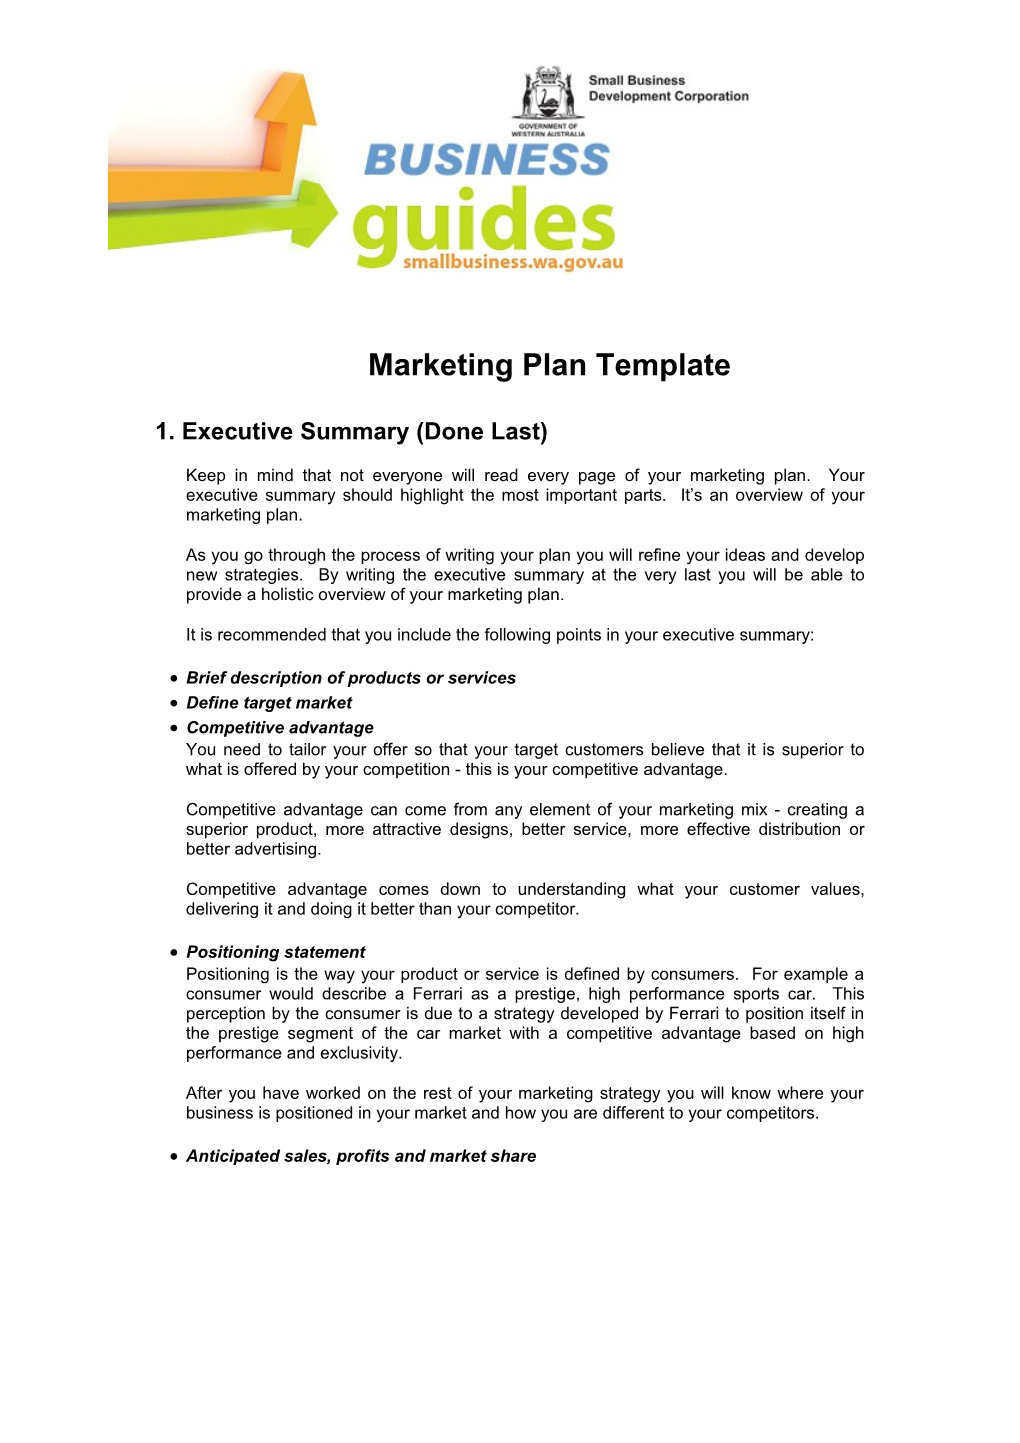 Business Guide: Marketing Plan Template